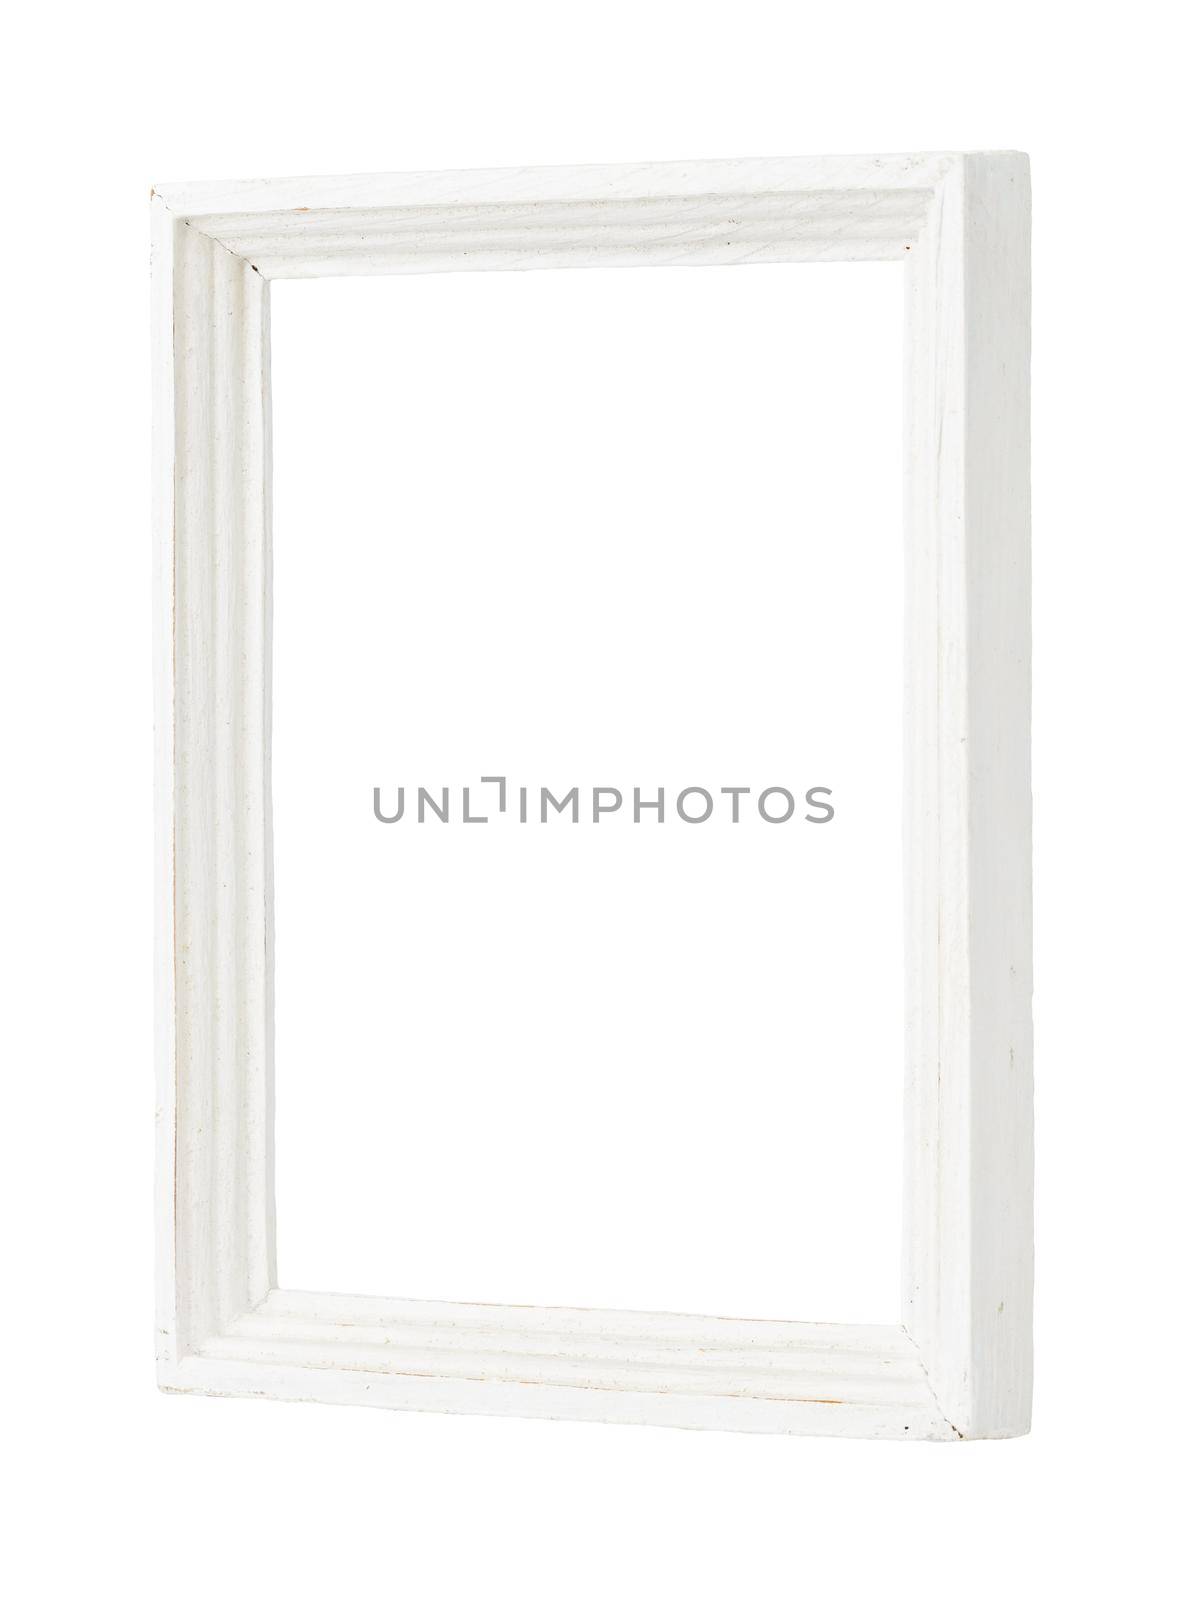 White rustic wooden picture frame isoladed, Picture frame mock up template on white background. Portrait format, angle view